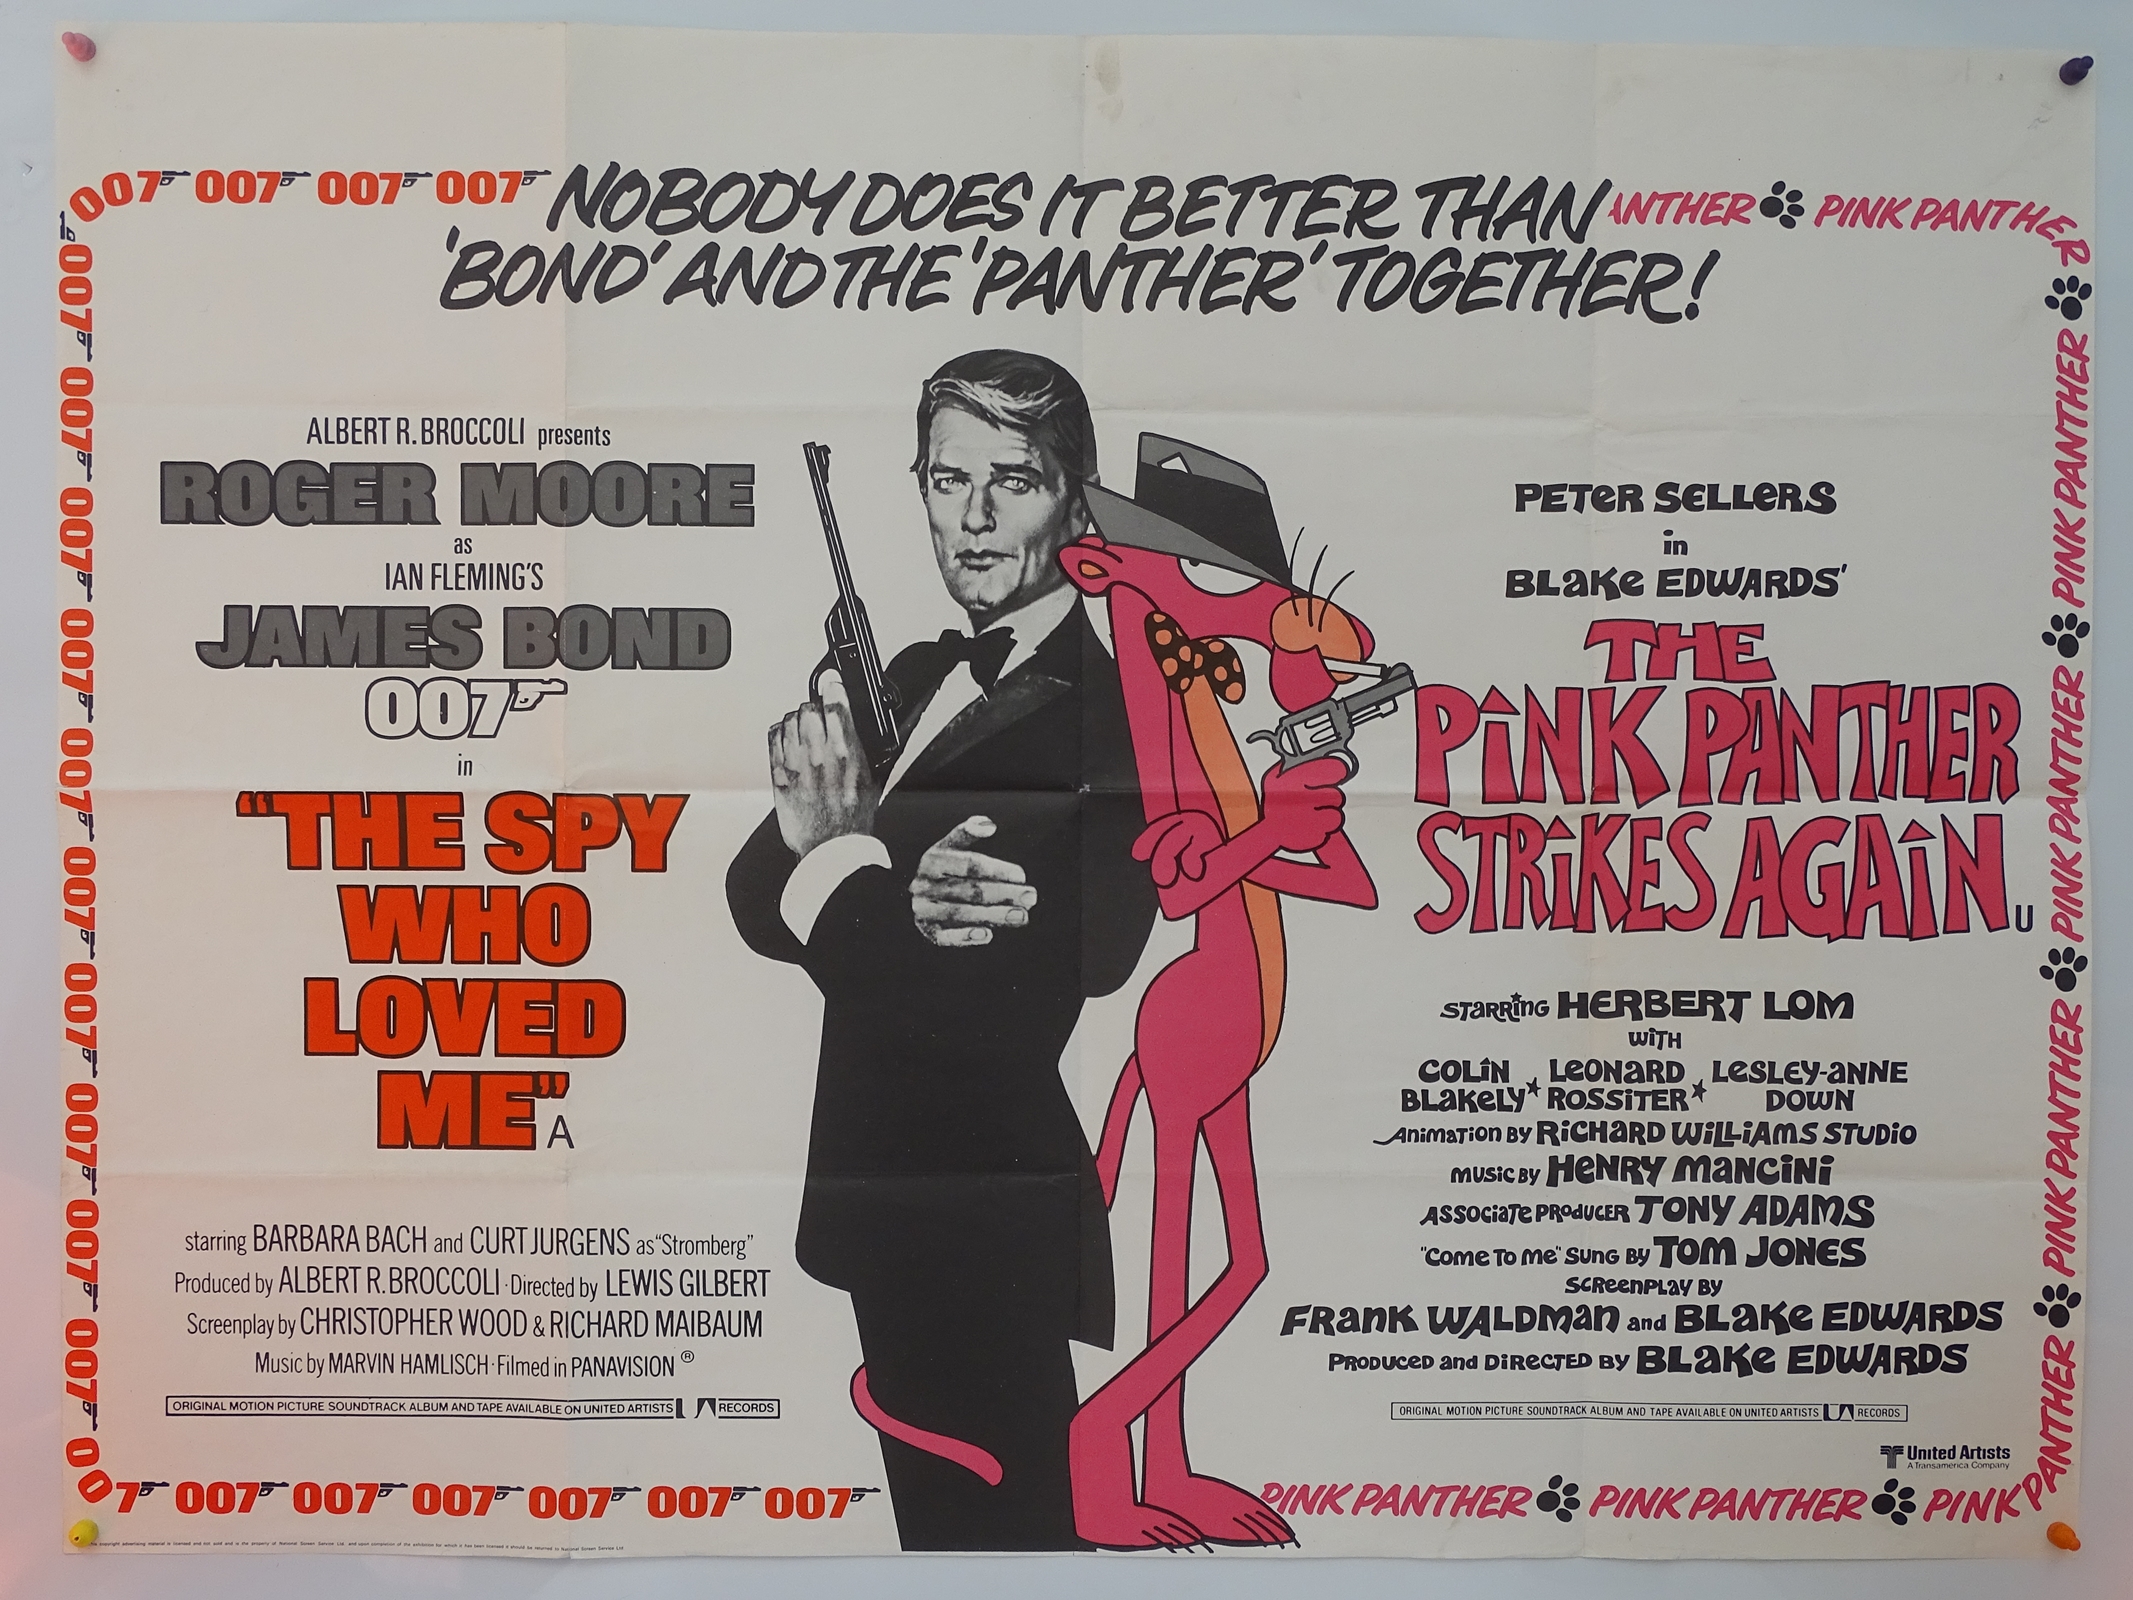 THE SPY WHO LOVED ME (1977) / THE PINK PANTHER STR